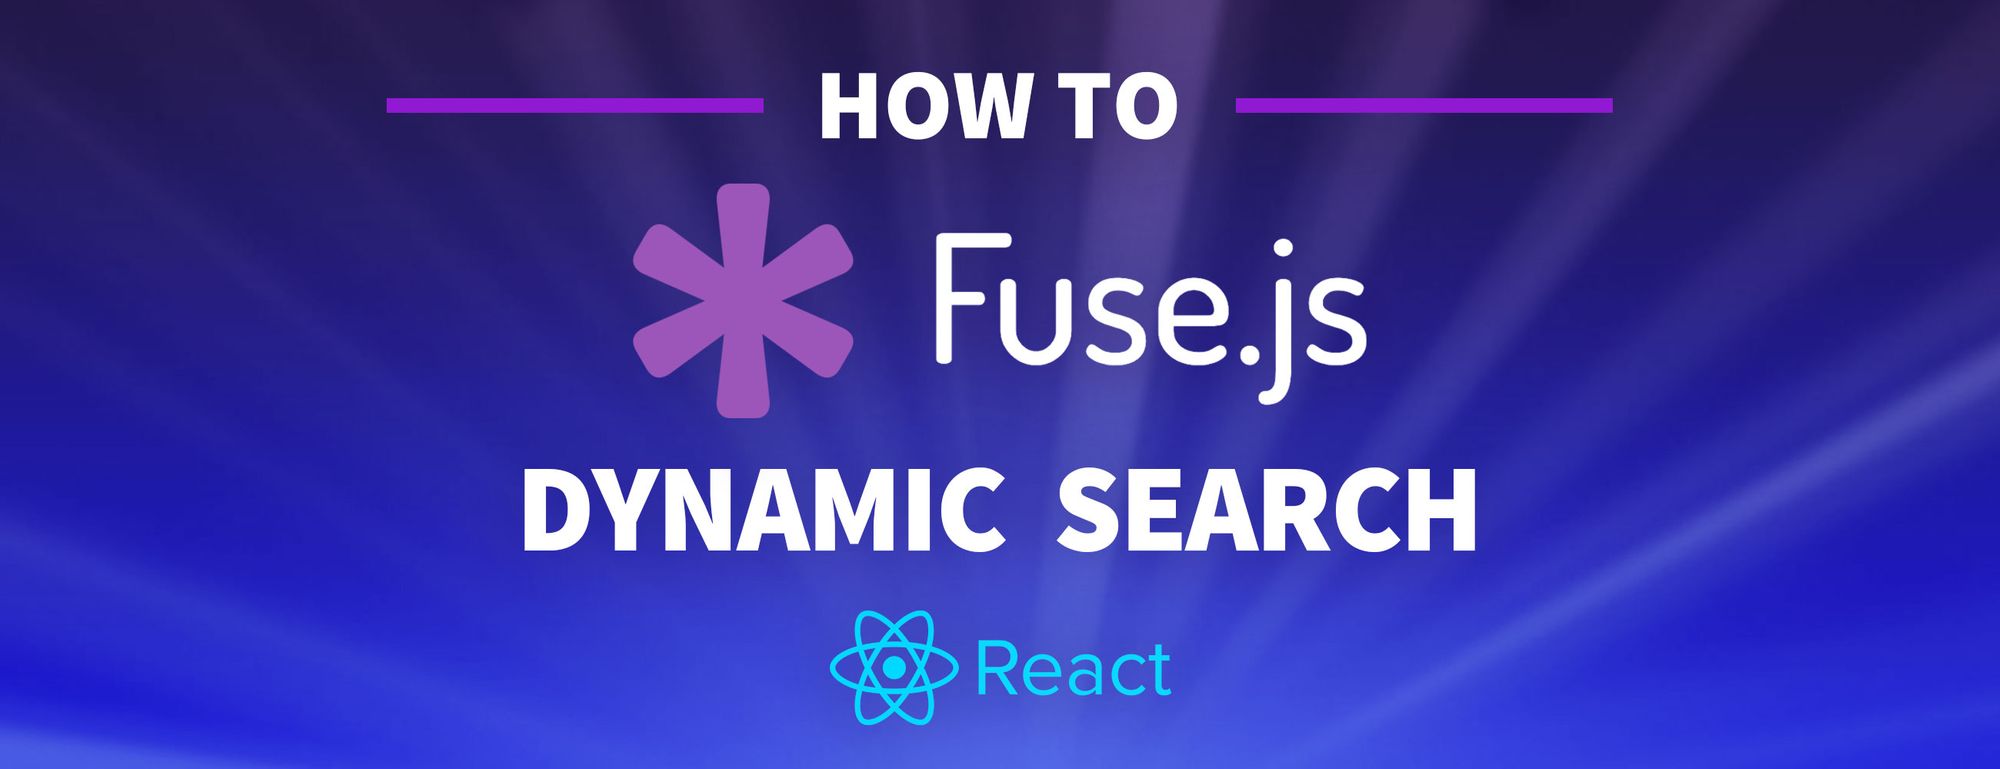 How to Add Search to a React App with Fuse.js